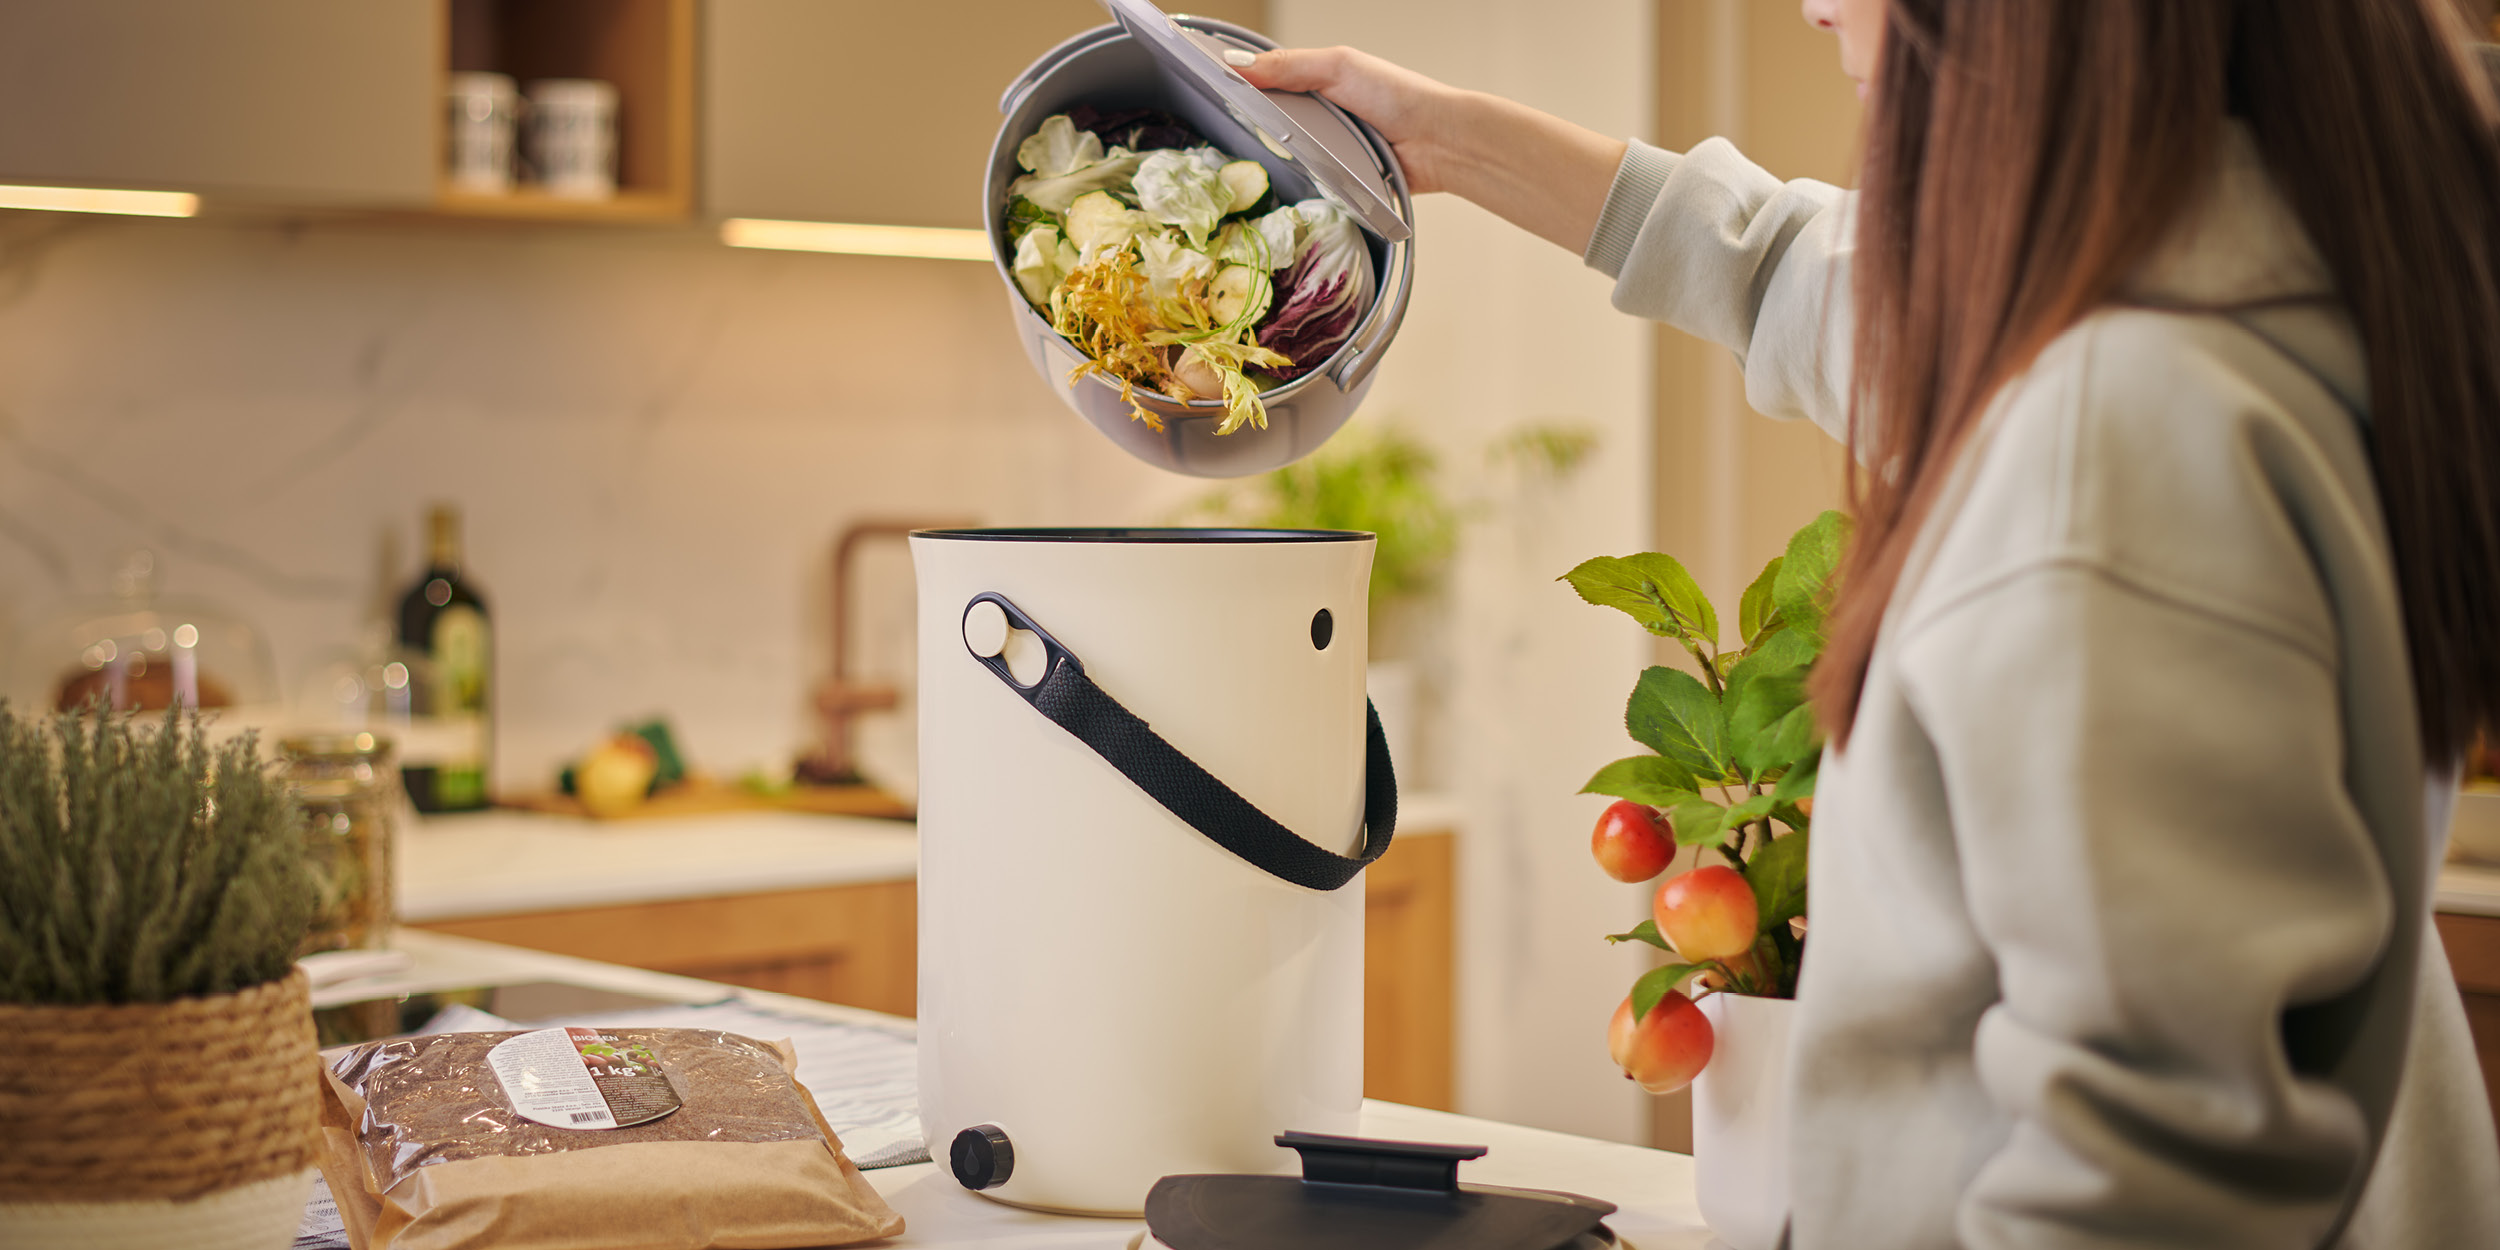 How to Use Organko Daily kitchen food waste bin